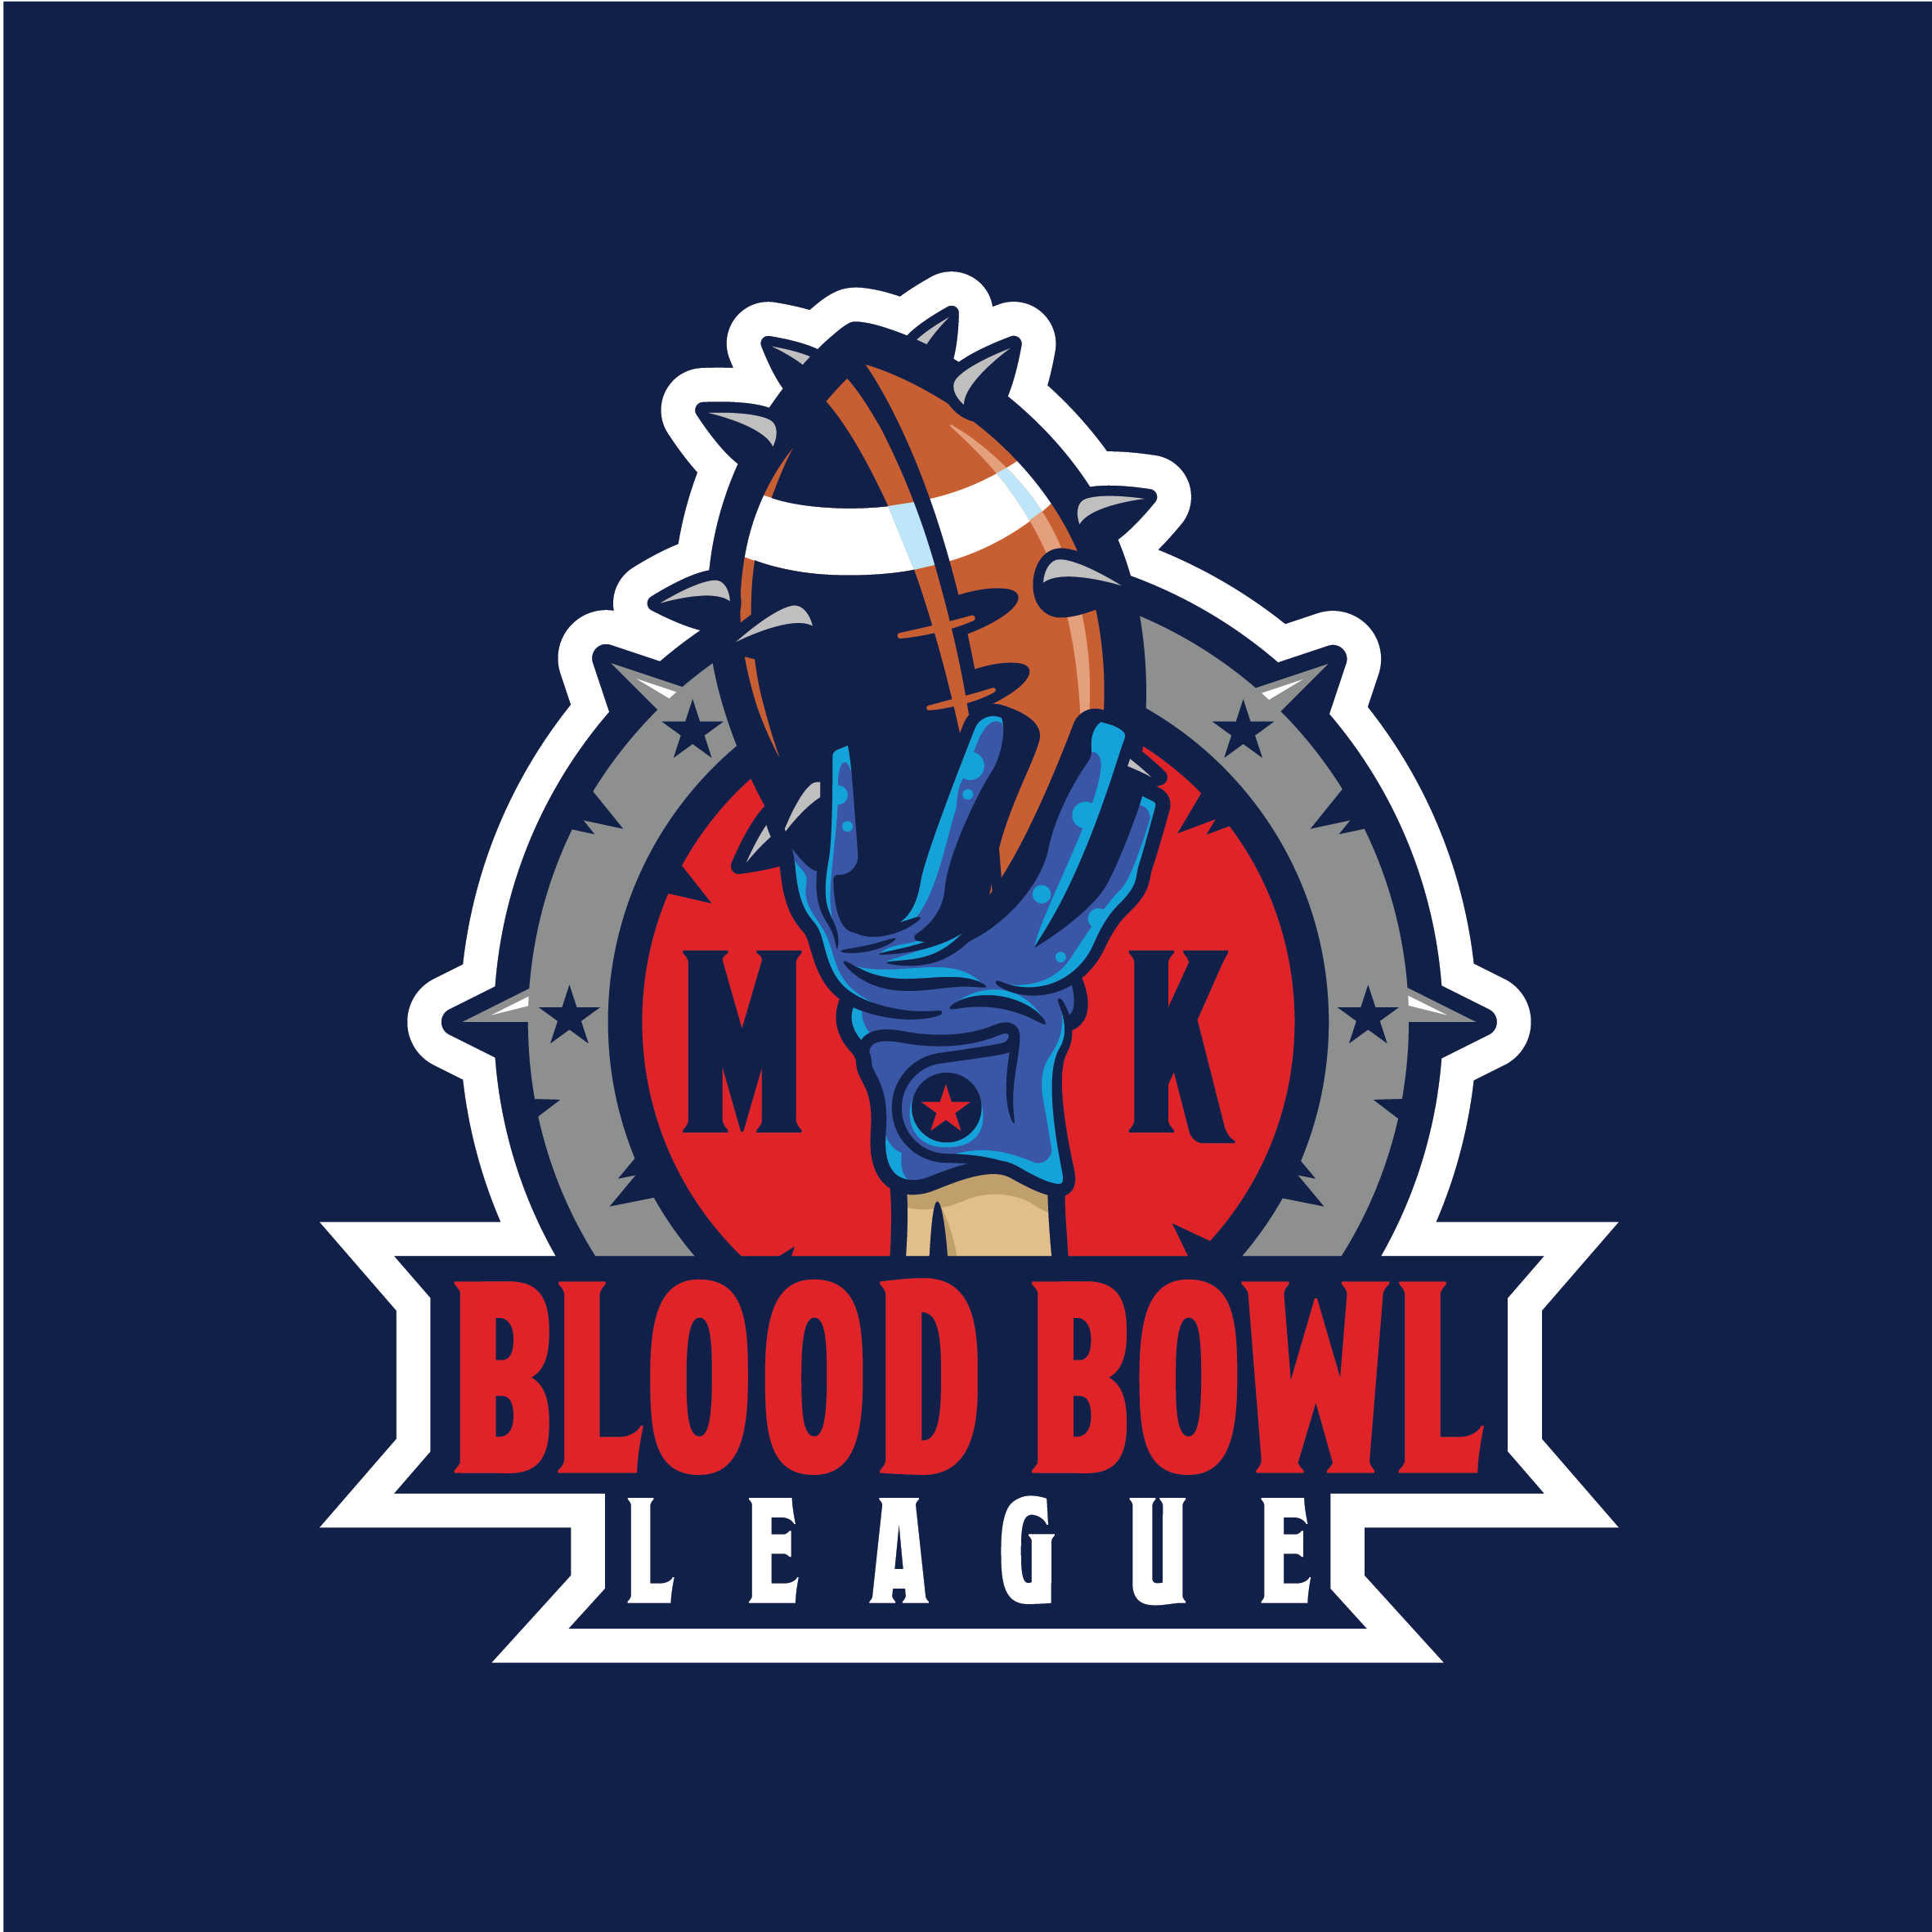 MK Blood Bowl League logo design by logo designer Tortoiseshell Black for your inspiration and for the worlds largest logo competition